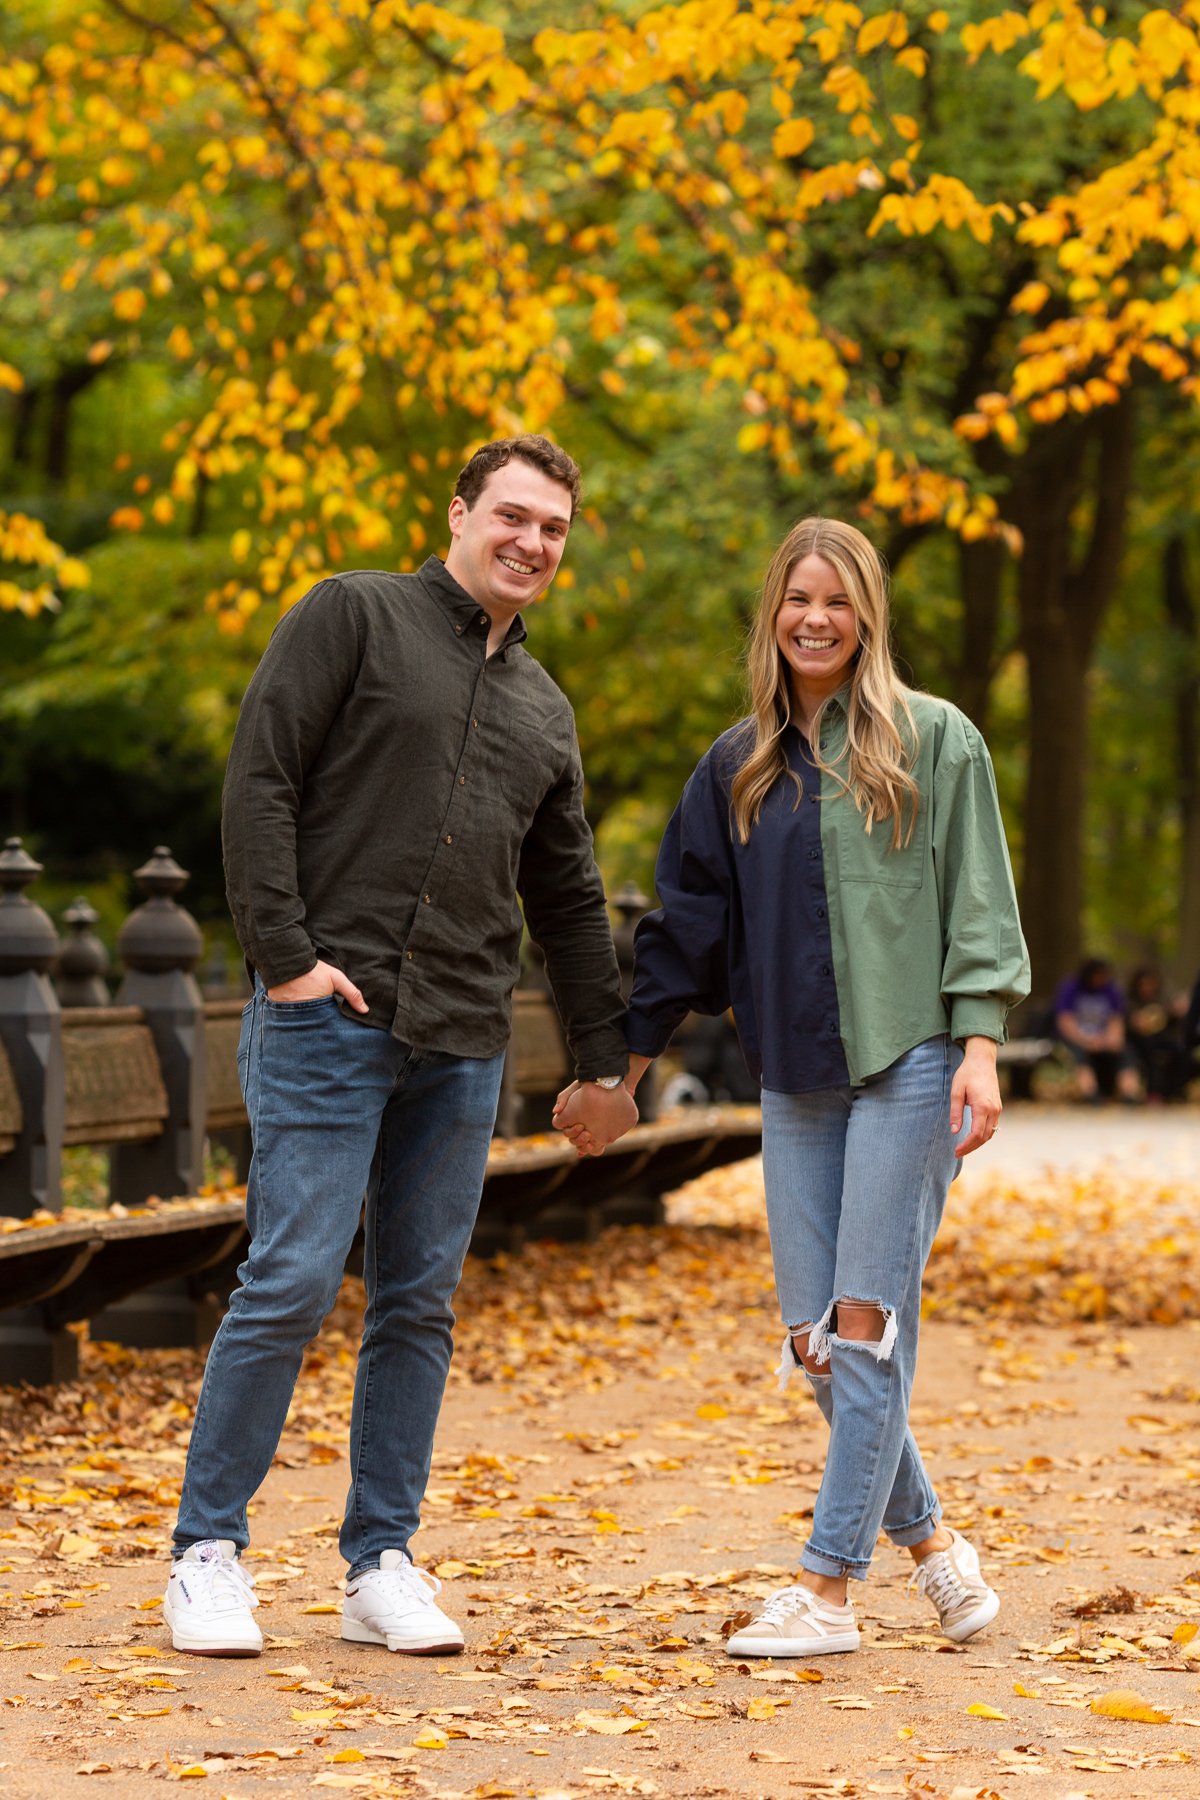 Central Park NYC Fall Foliage Proposal Photographer_0014.jpg